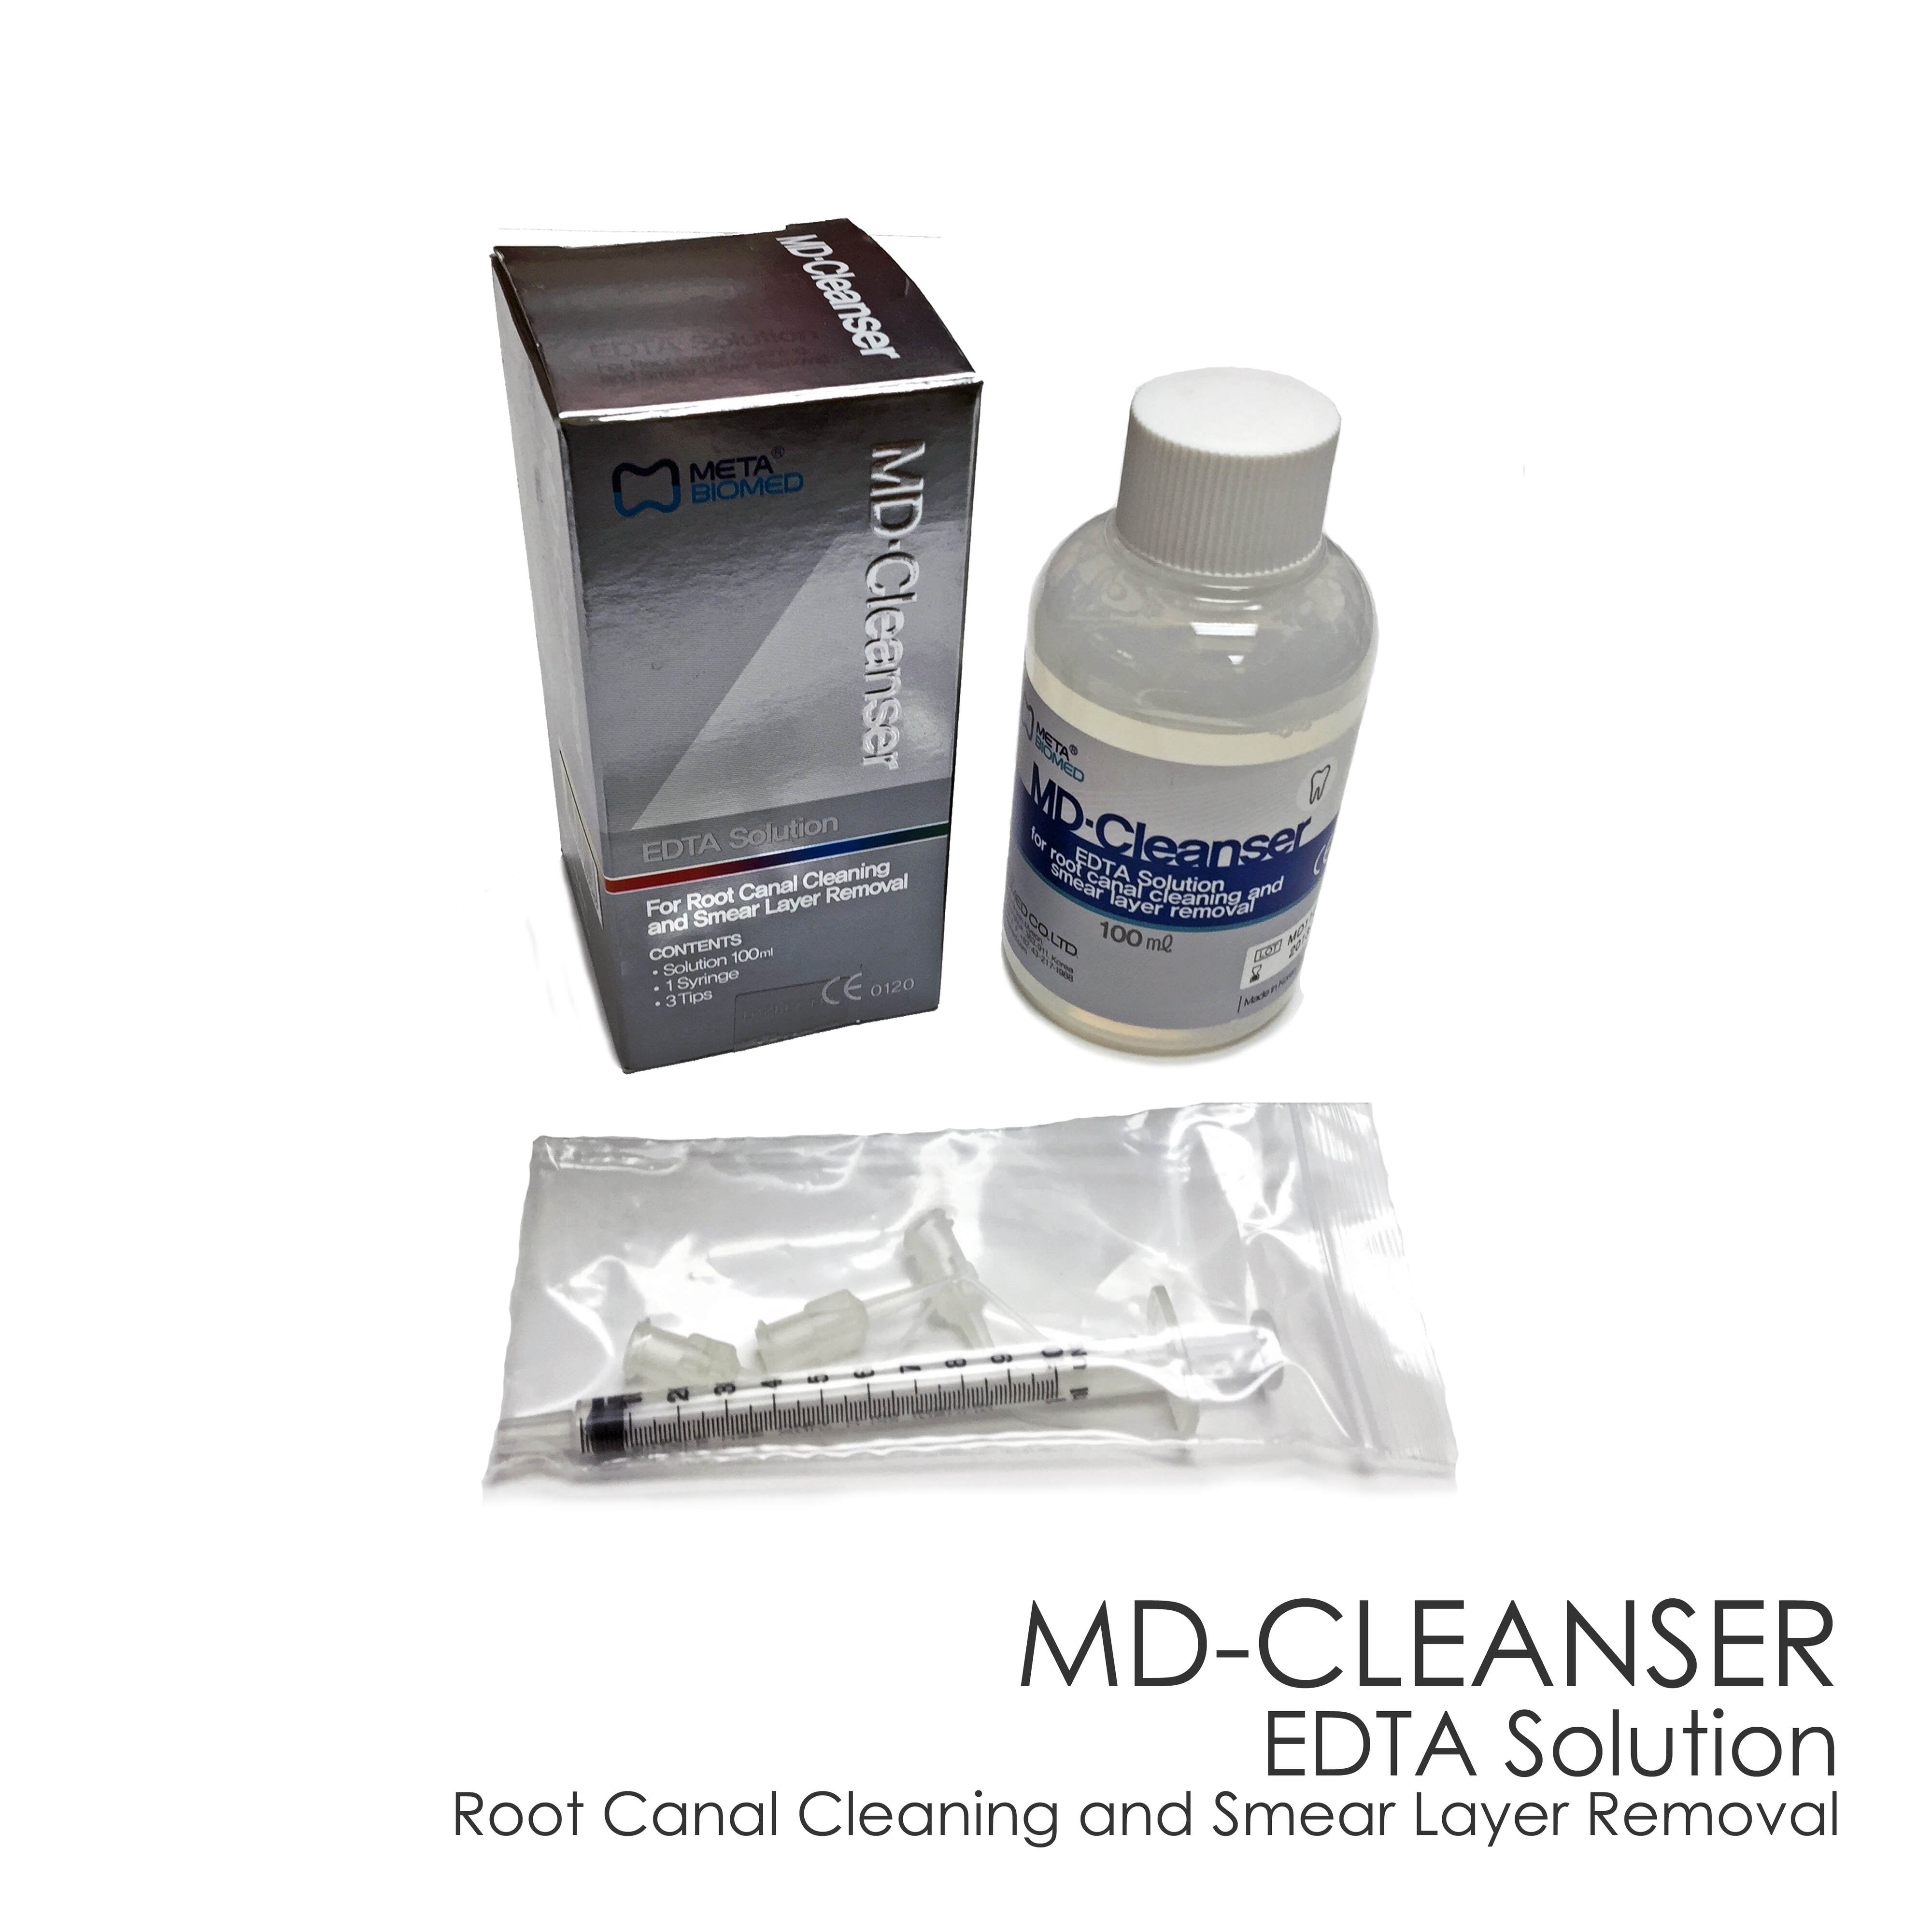 MD-Cleanser 17 EDTA Solution